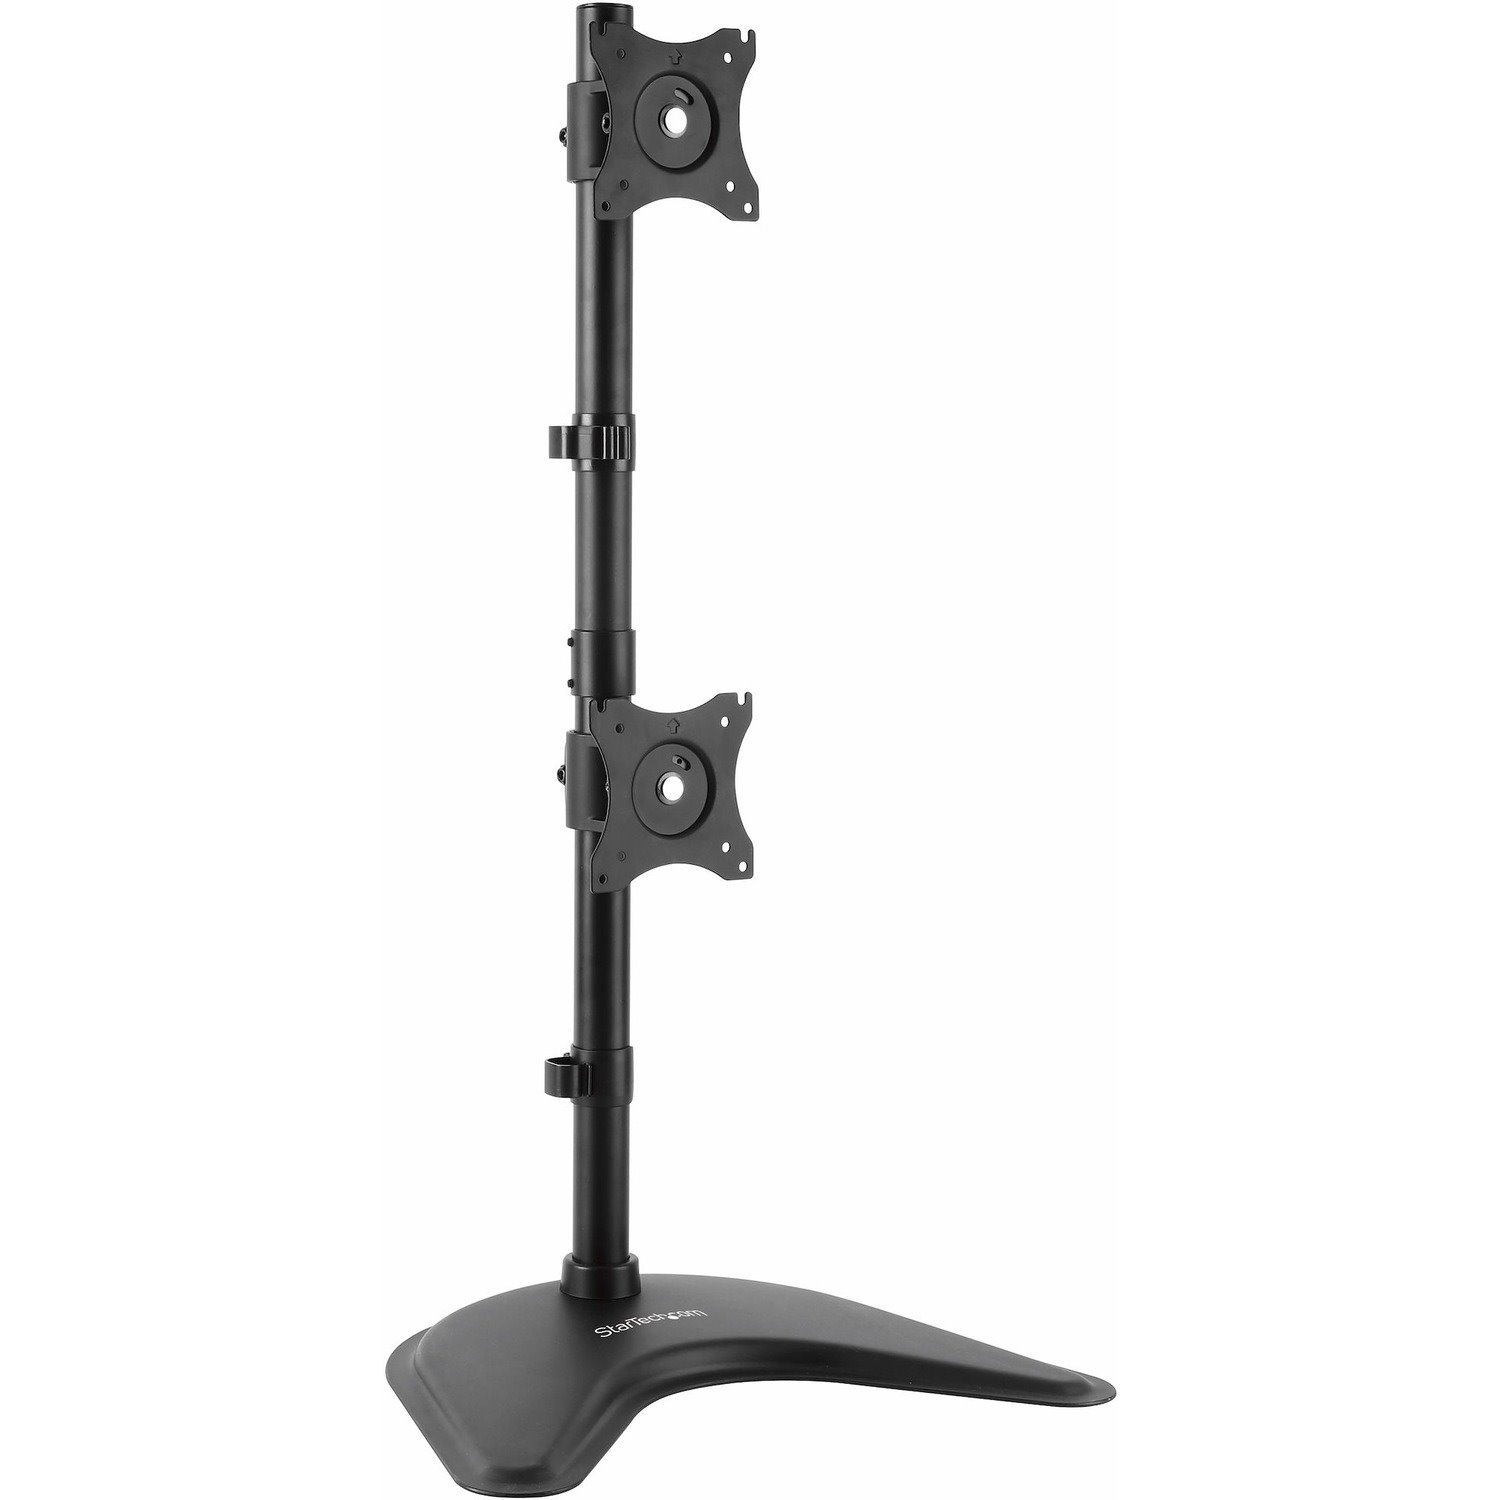 StarTech.com Vertical Dual Monitor Stand, Heavy Duty Steel, Monitors up to 27" (22lb/10kg), Vesa Monitor, Computer Monitor Stand